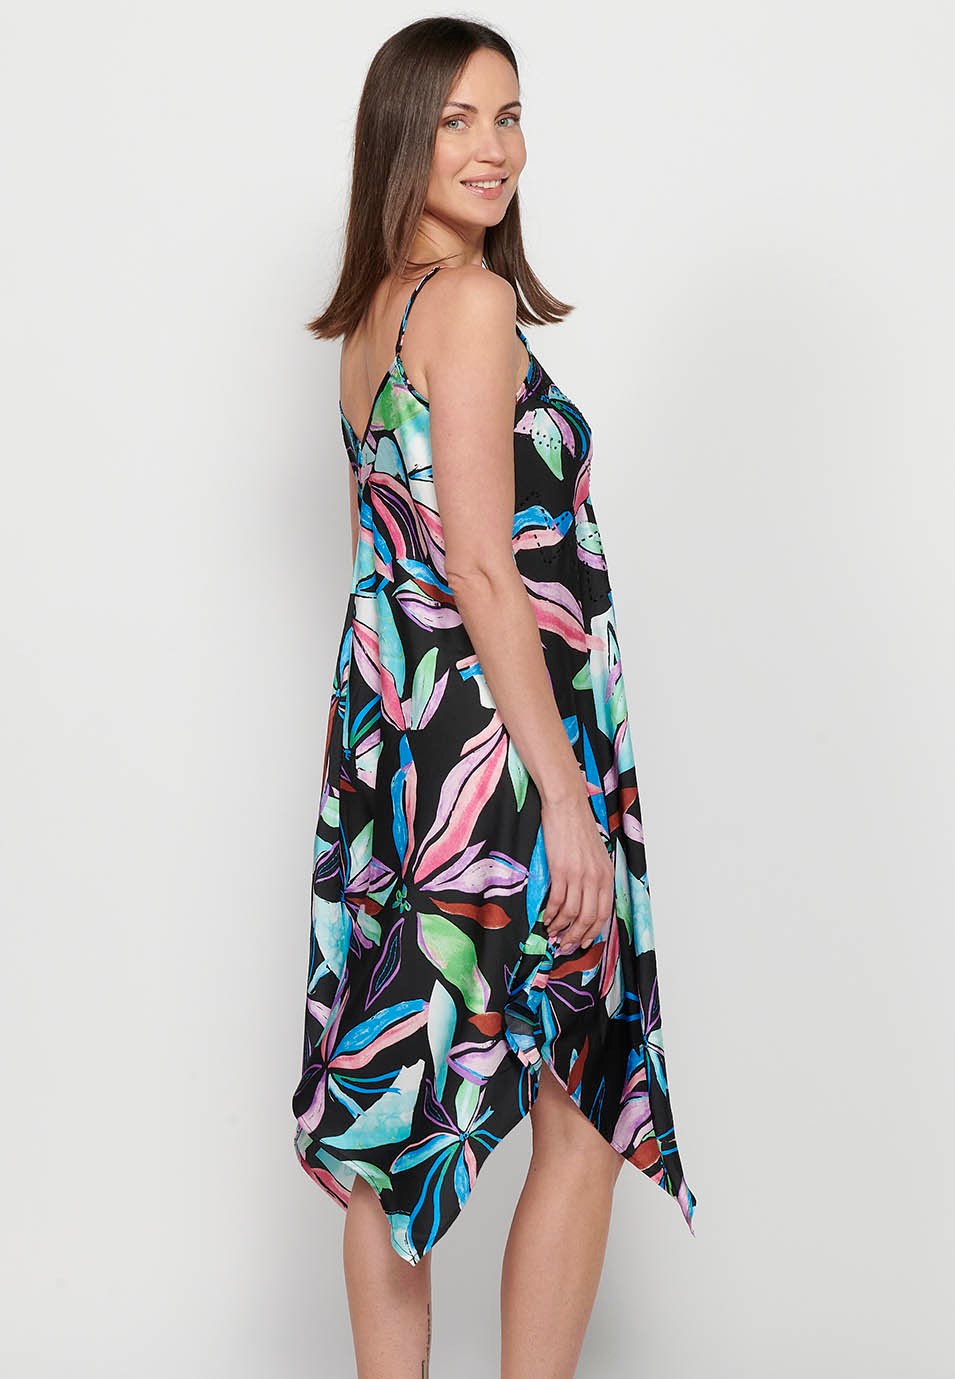 Midi dress with adjustable straps with sparkling neckline and long peaked finish with Multicolor floral print for Women 1